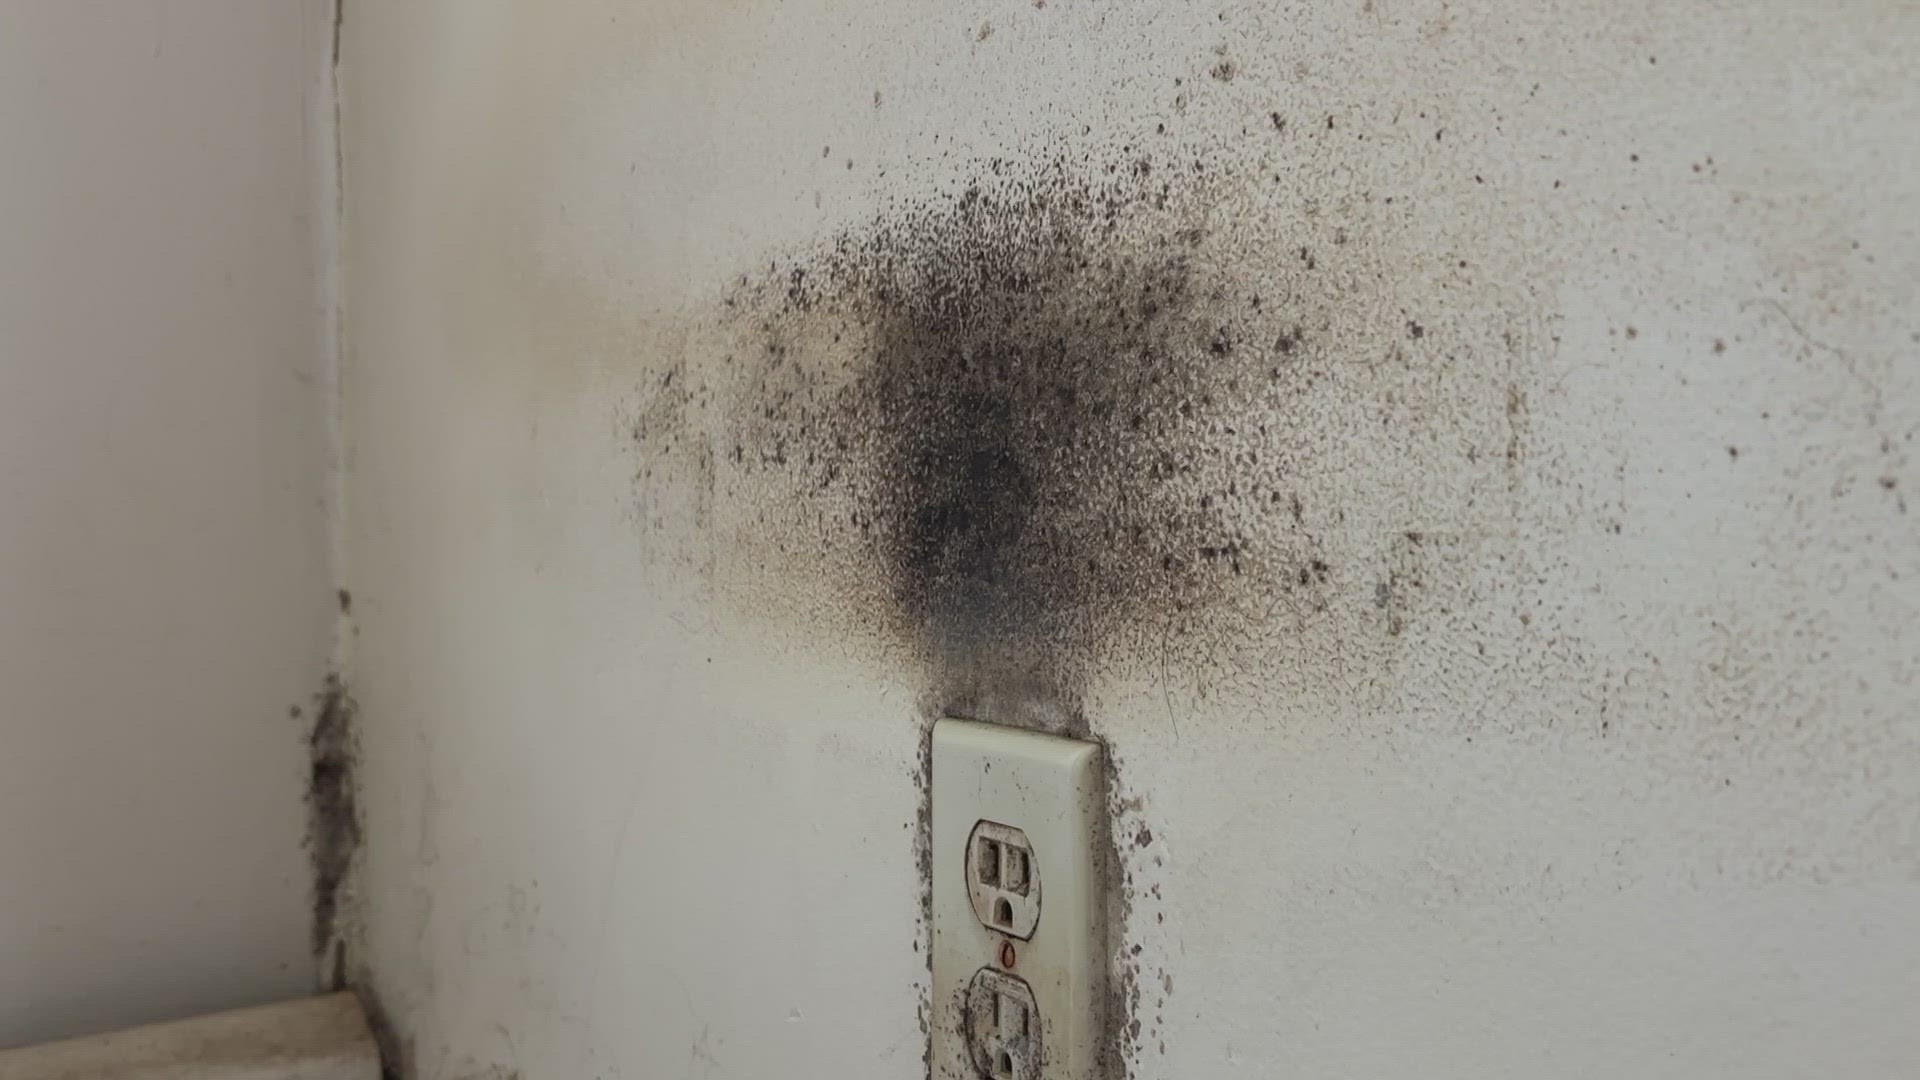 The complaints were raised over widespread mold issues at East Bayside Apartments, managed by the Portland Housing Authority.